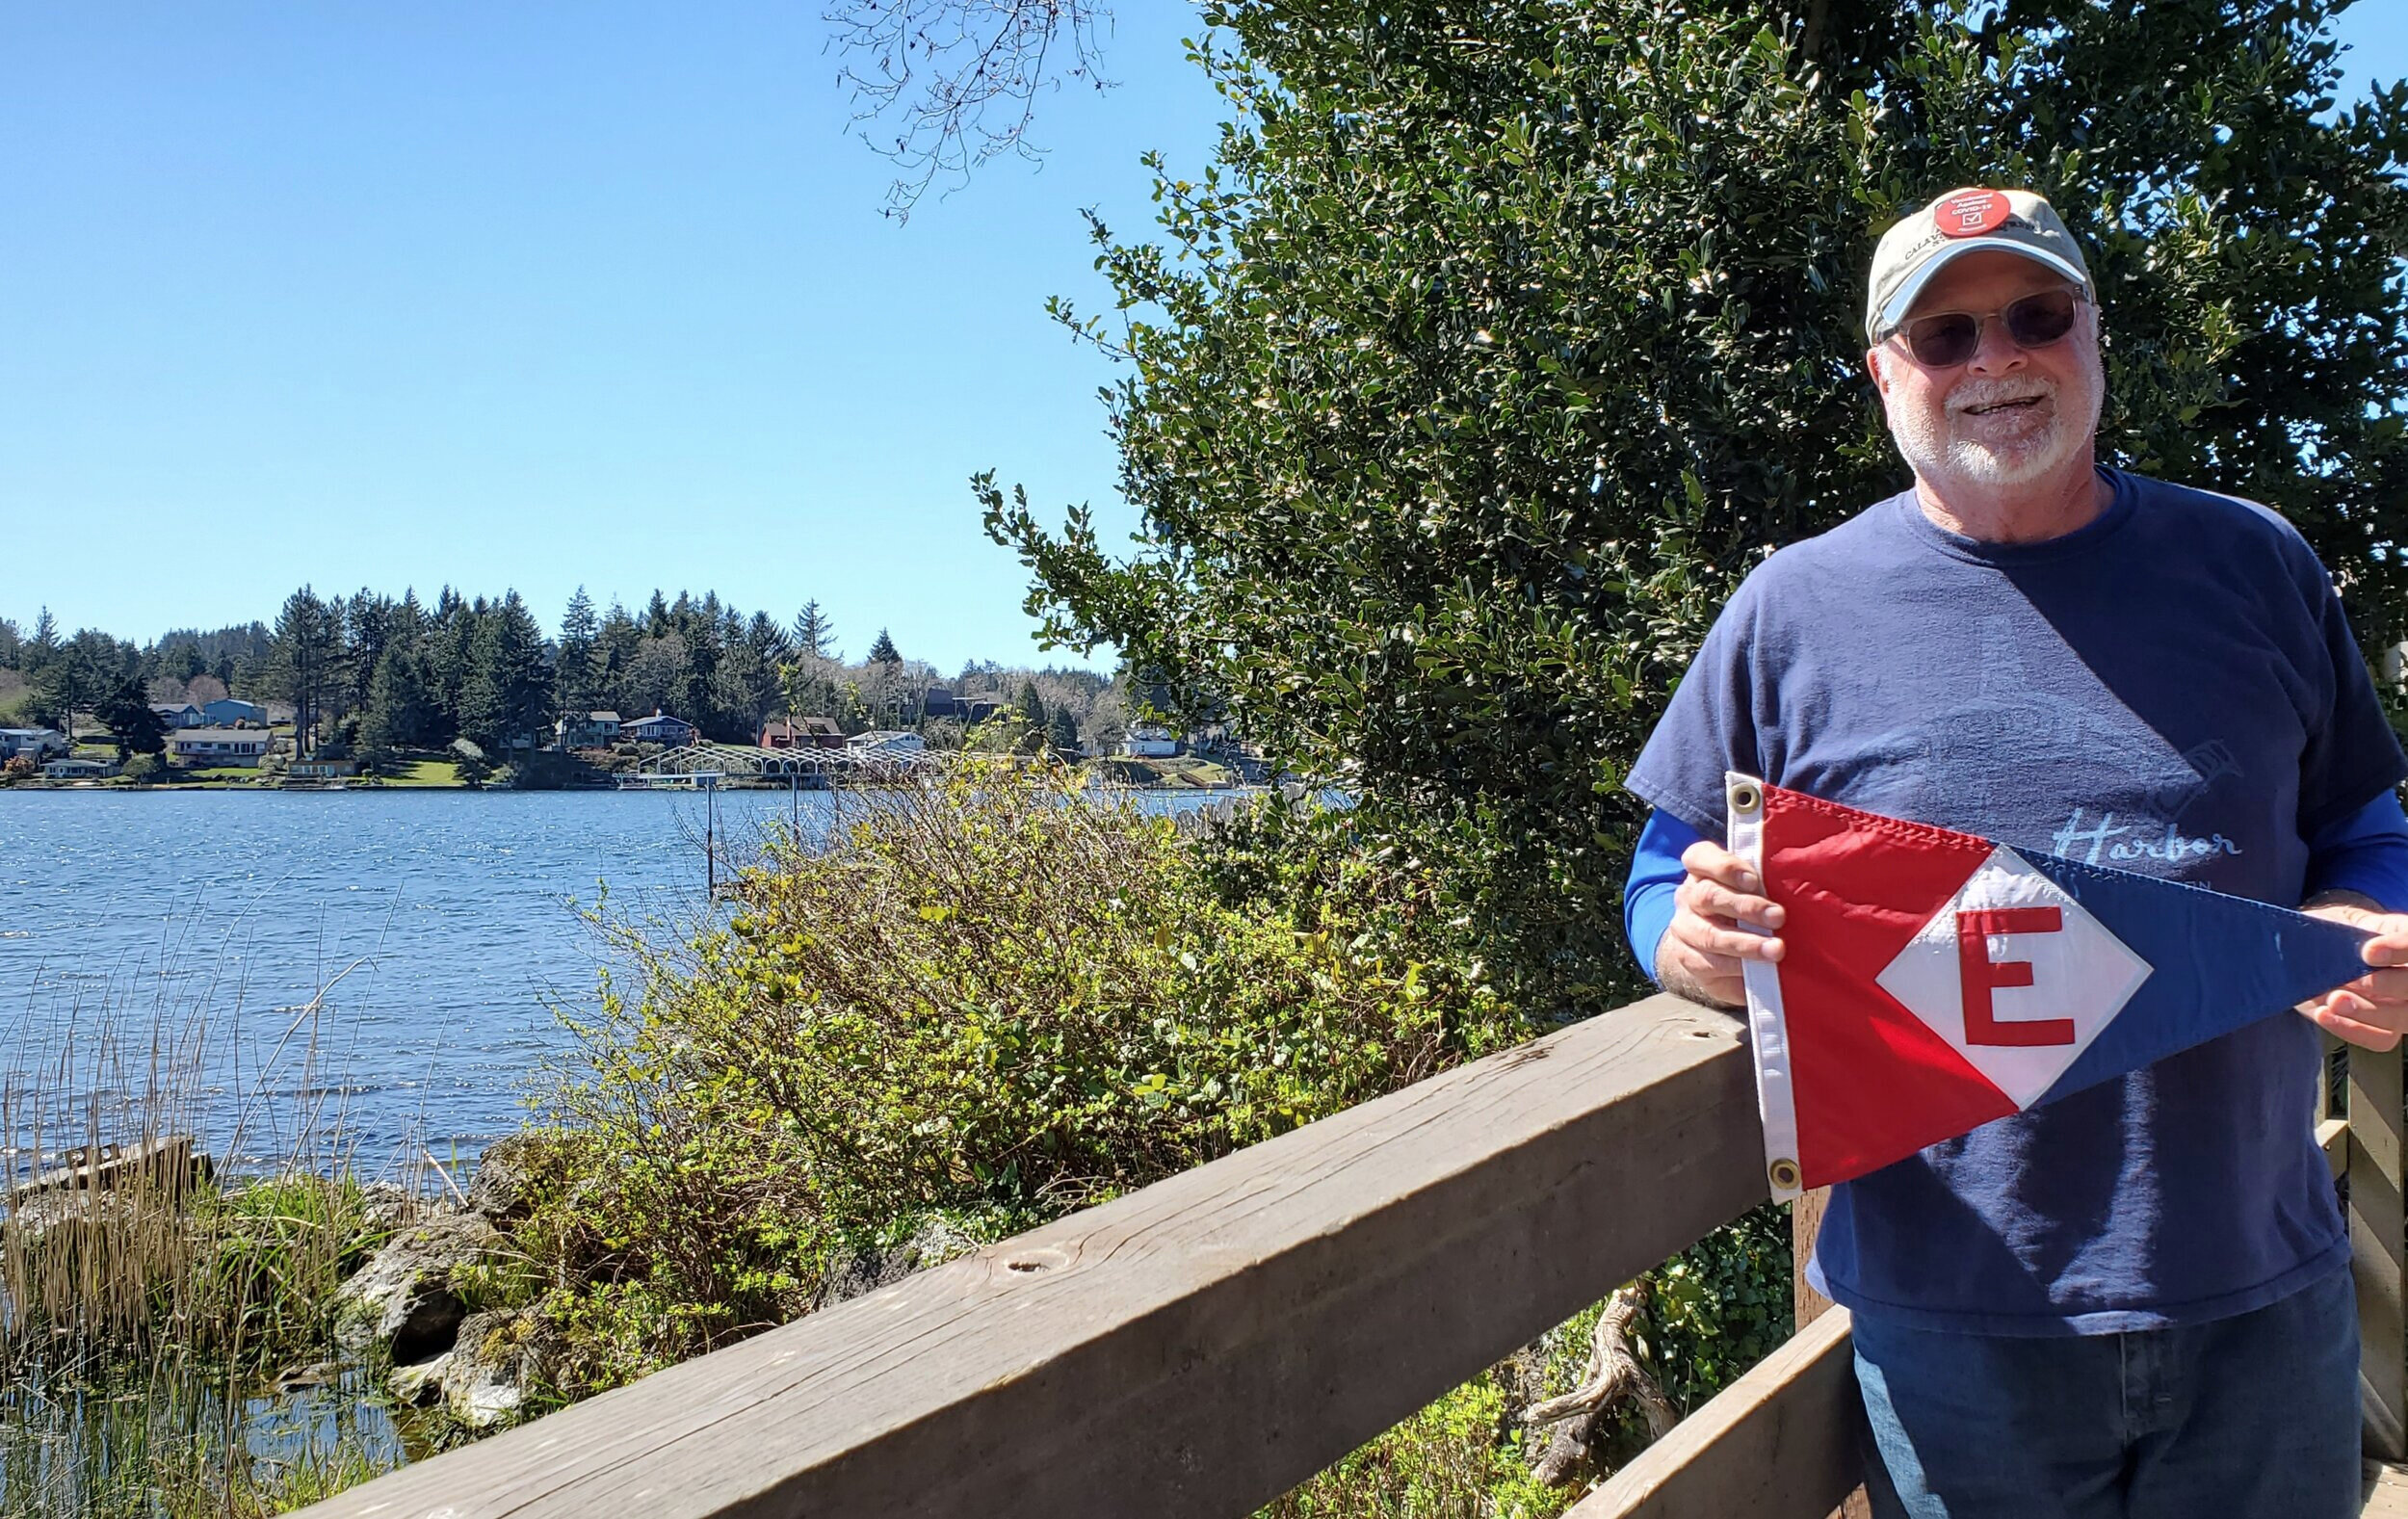  Murray hoists the colors at Devil’s Lake in Lincoln City, Oregon 